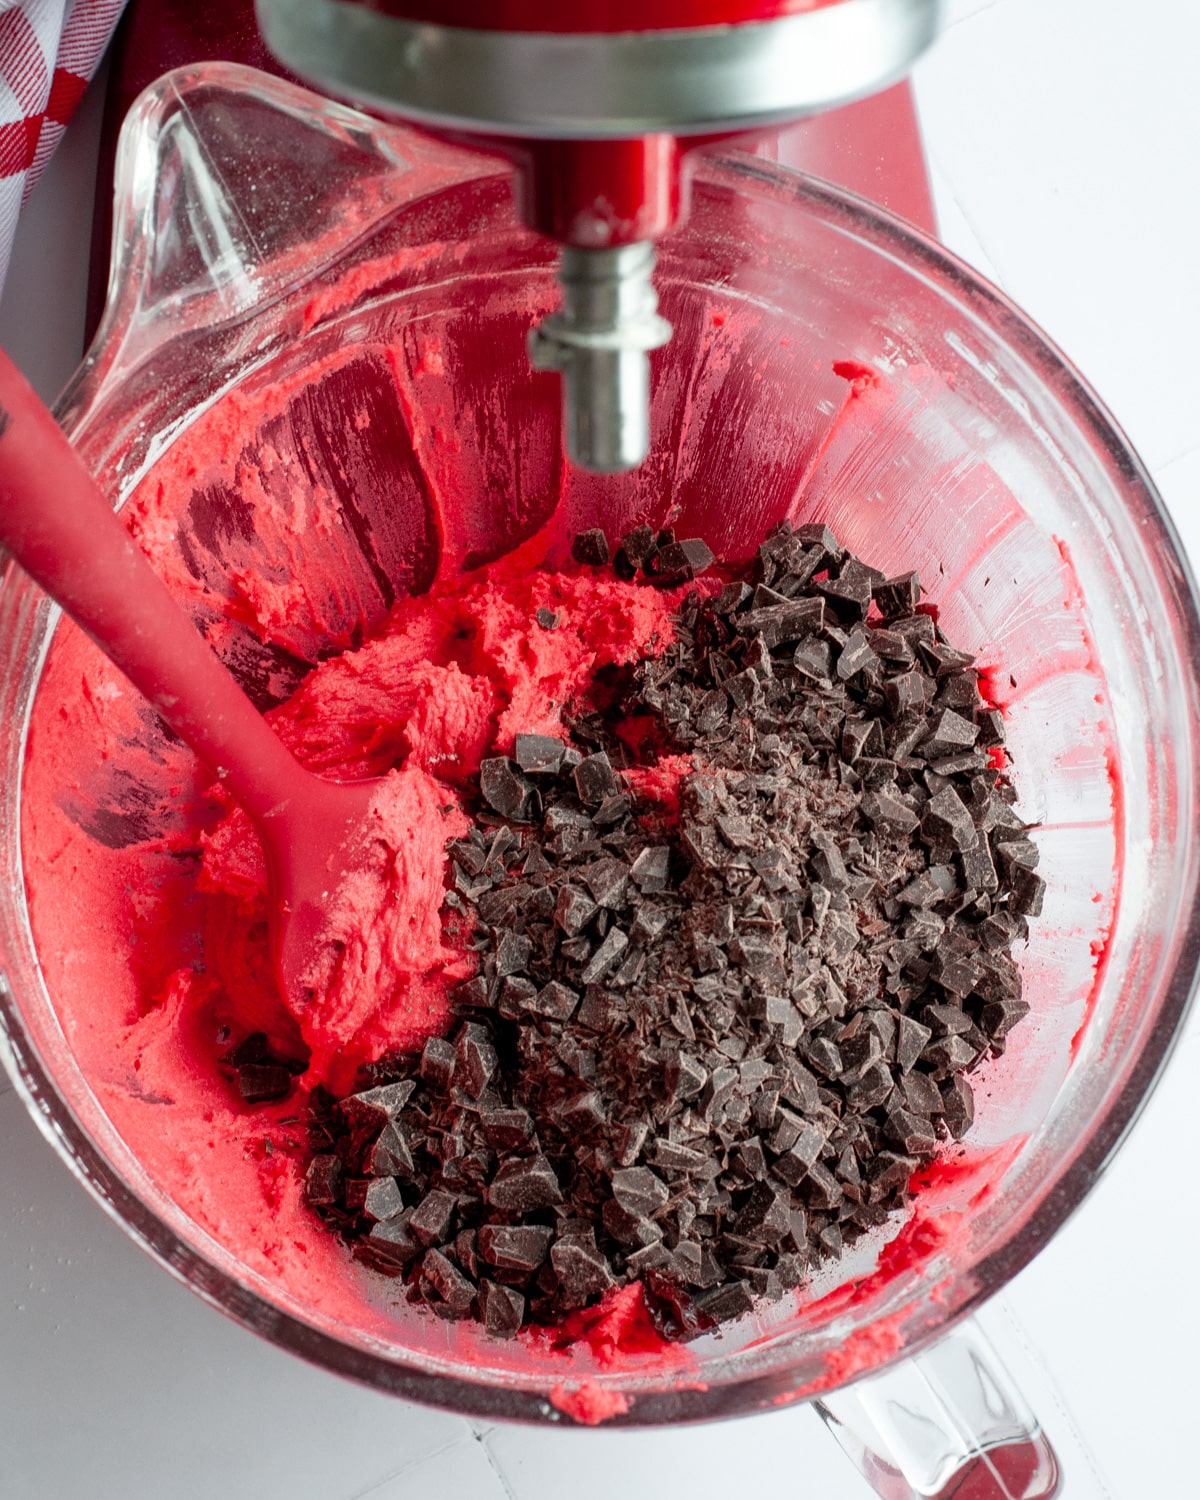 a glass mixing bowl filled with bright red dough and chopped pieces of chocolate ready to be mixed in. the mixing bowl sits in the base of a red stand mixer and a red and white checkered linen is in the background.